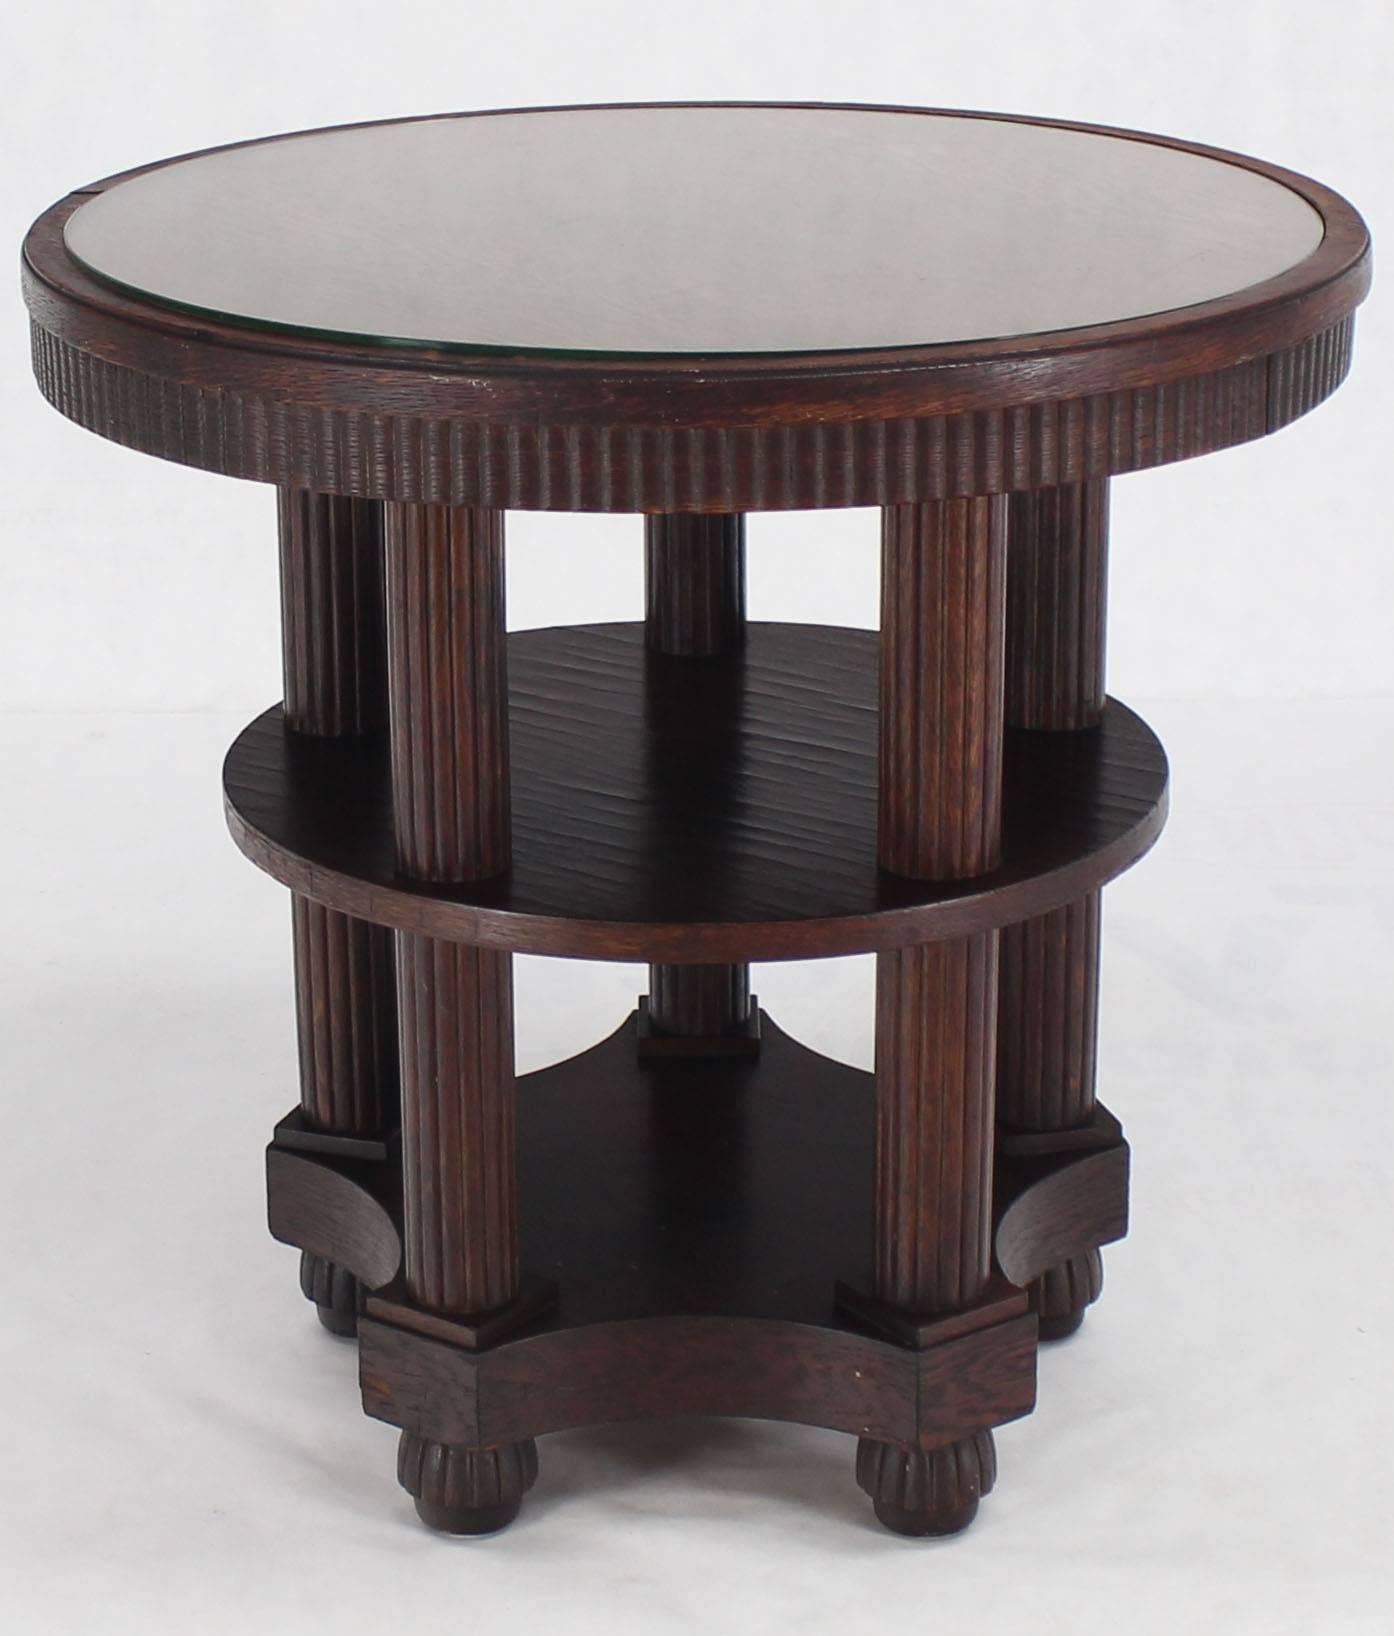 American Fluted Legs Round Center Pedestal Gueridon Table Art Deco Arts and Crafts Oak  For Sale